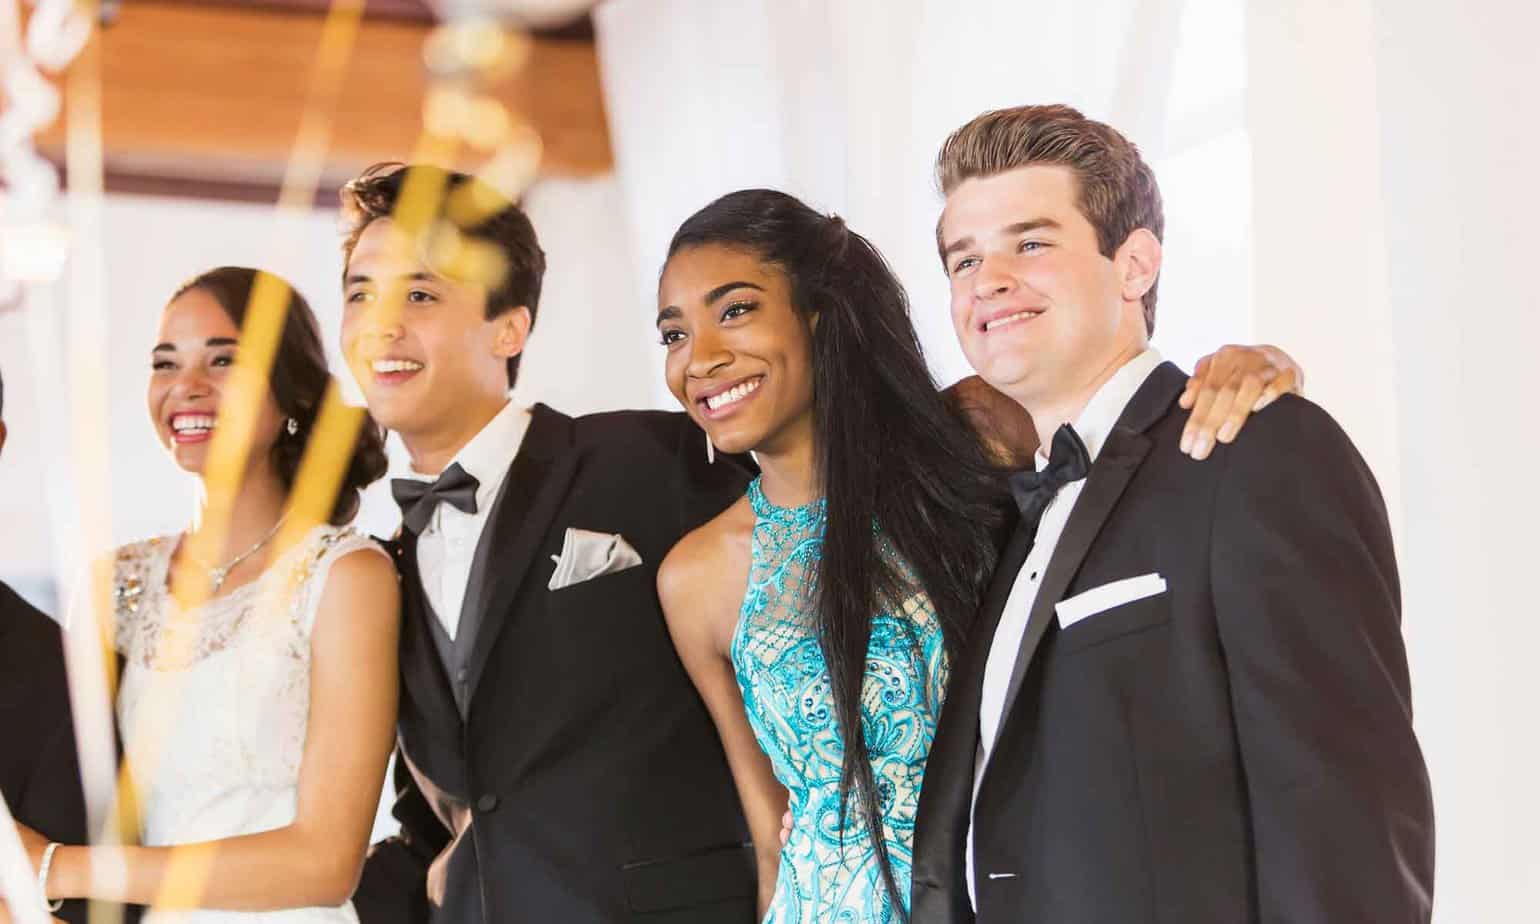 group of teenage high school seniors taking a photo together smiling at prom in dresses and tuxedos